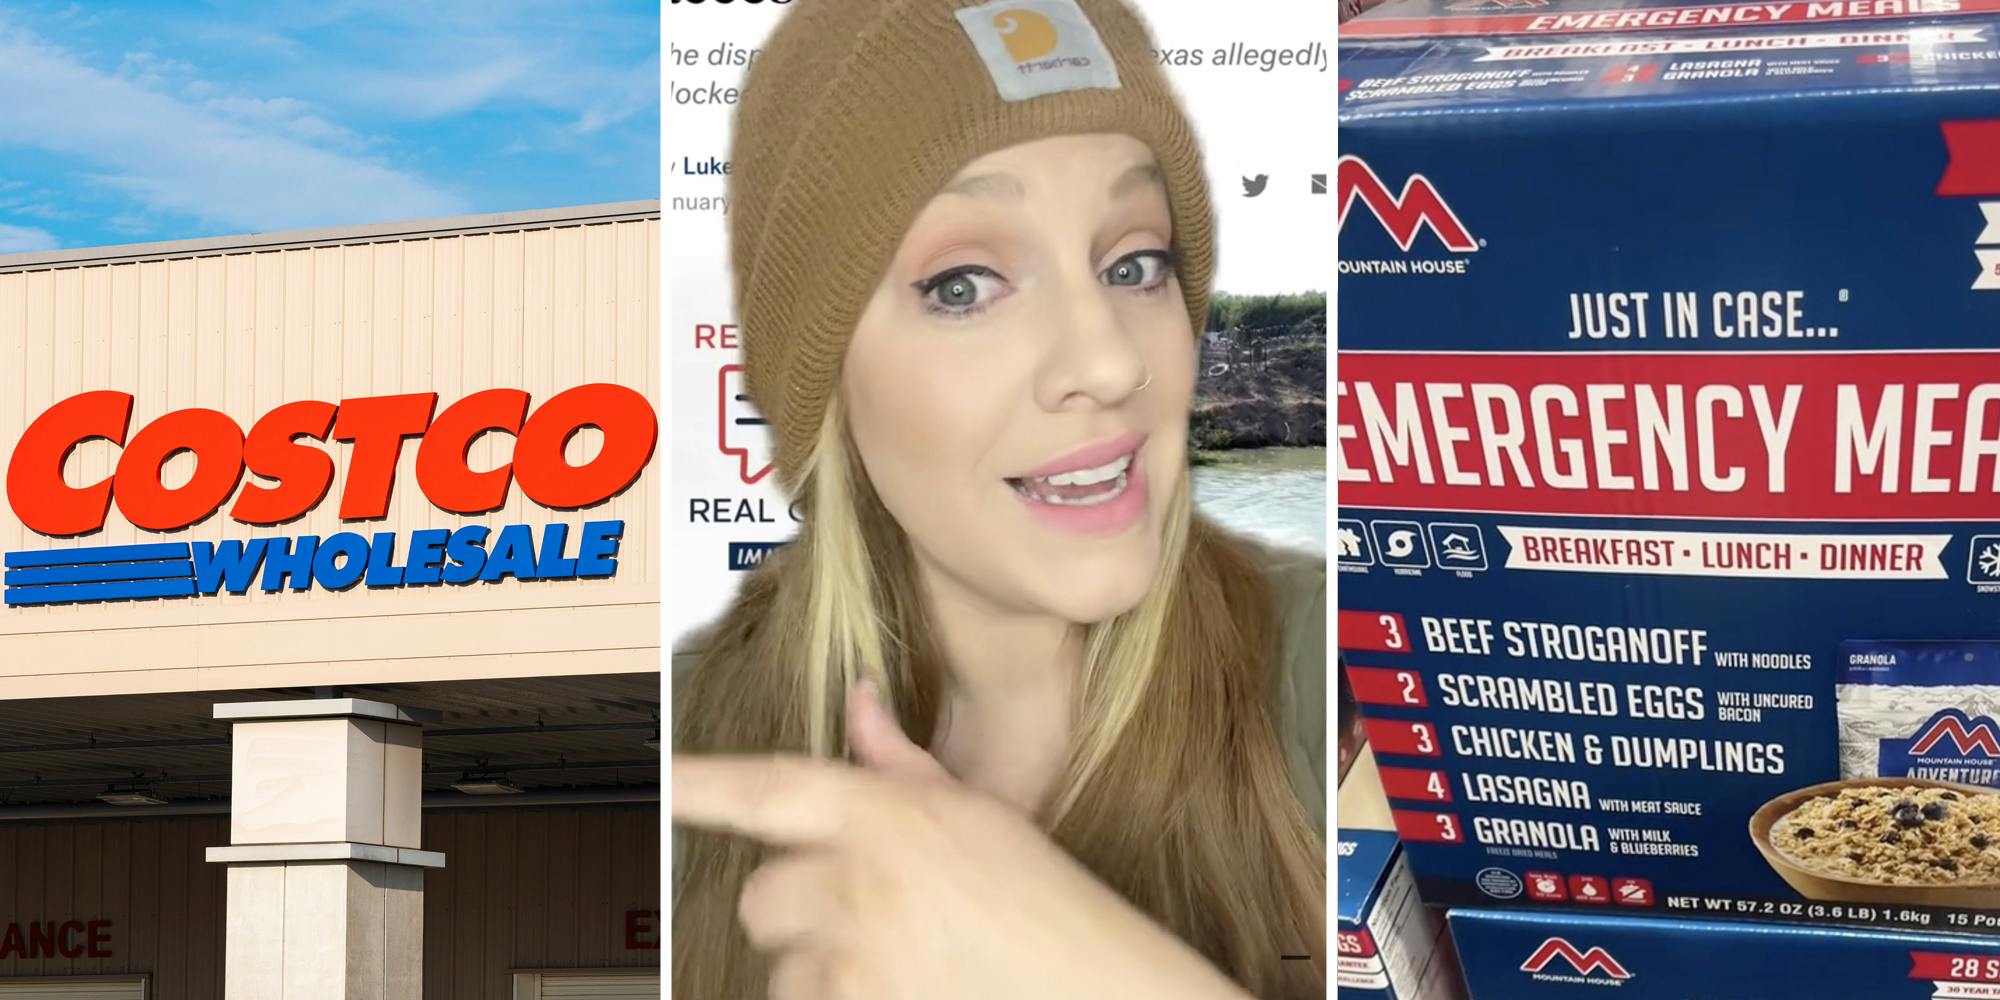 Costco storefront(l), Woman talking(c), Emergency meals(r)